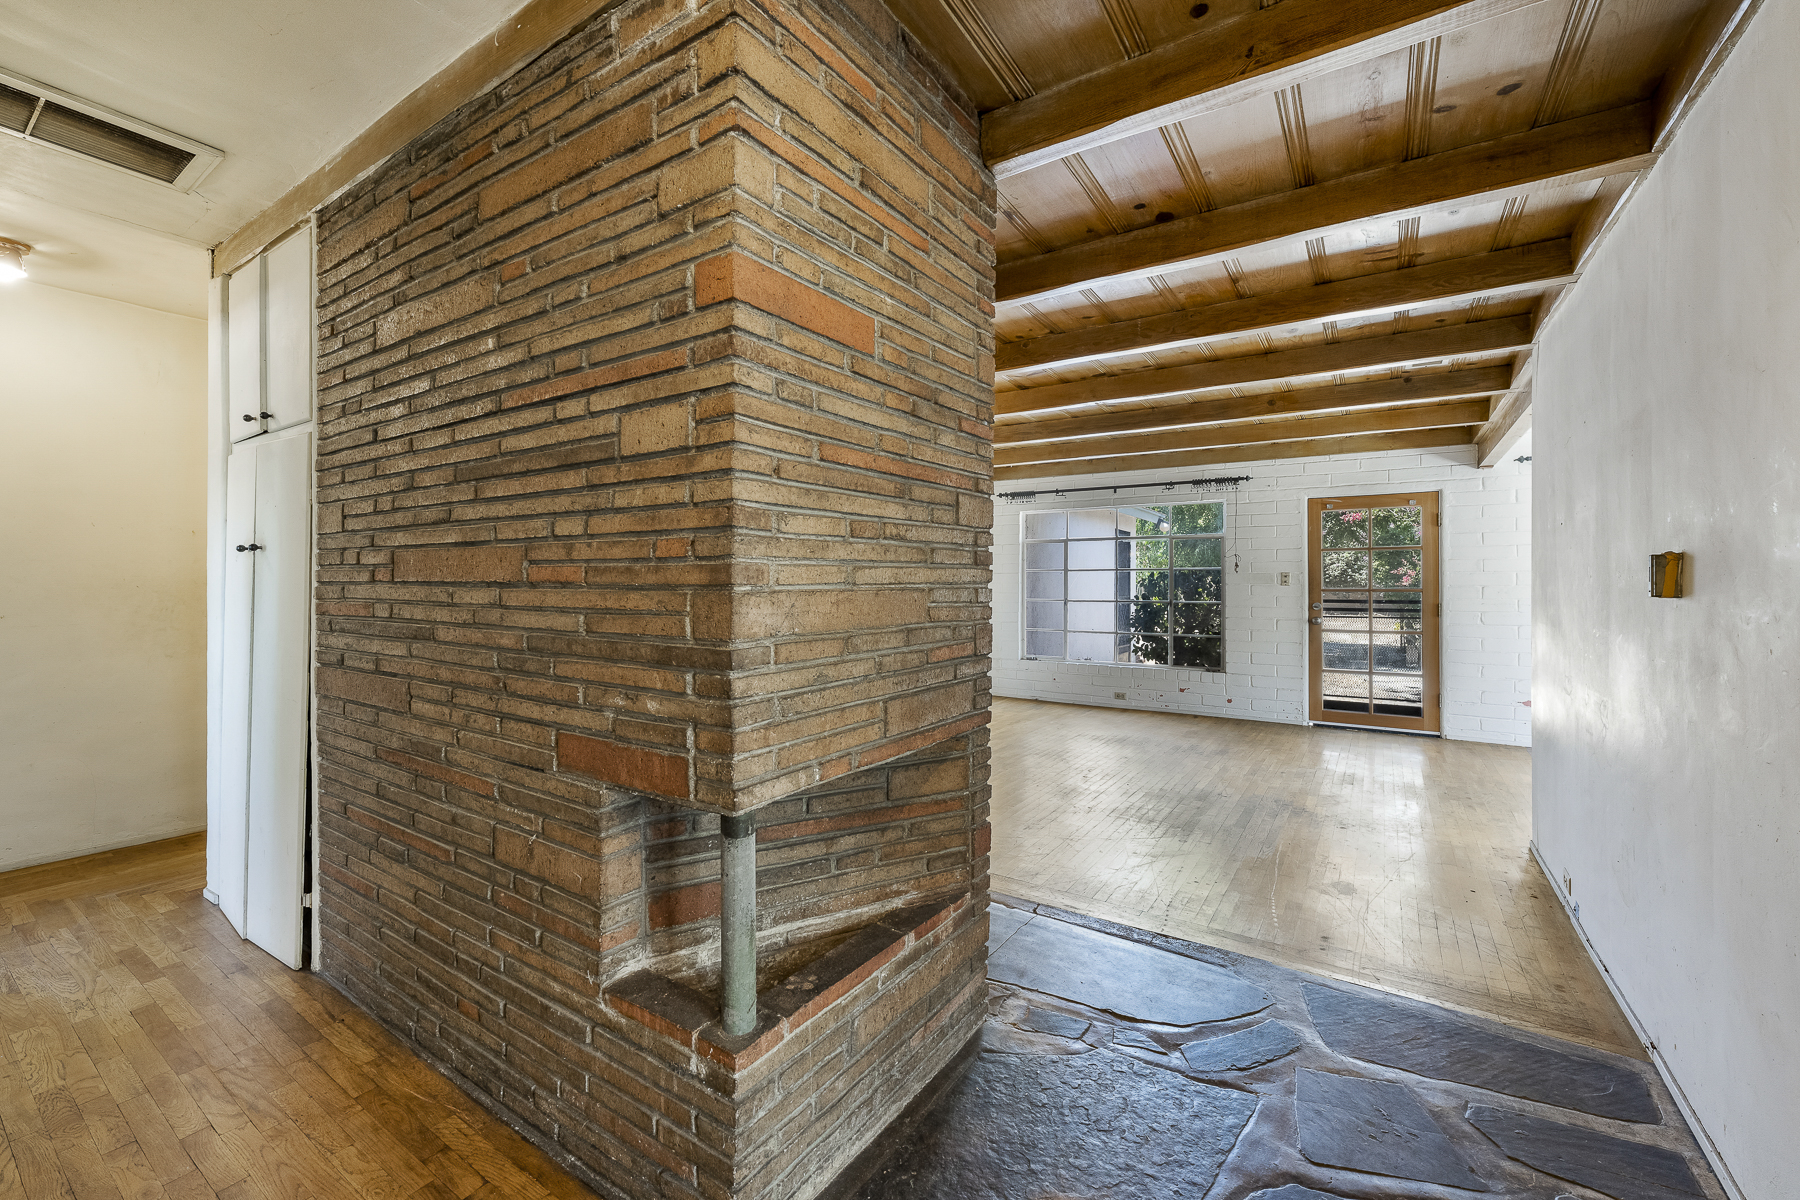 319 E. Francis Ave, La Habra, CA 90631: Interior shot, back of fireplace and living room.